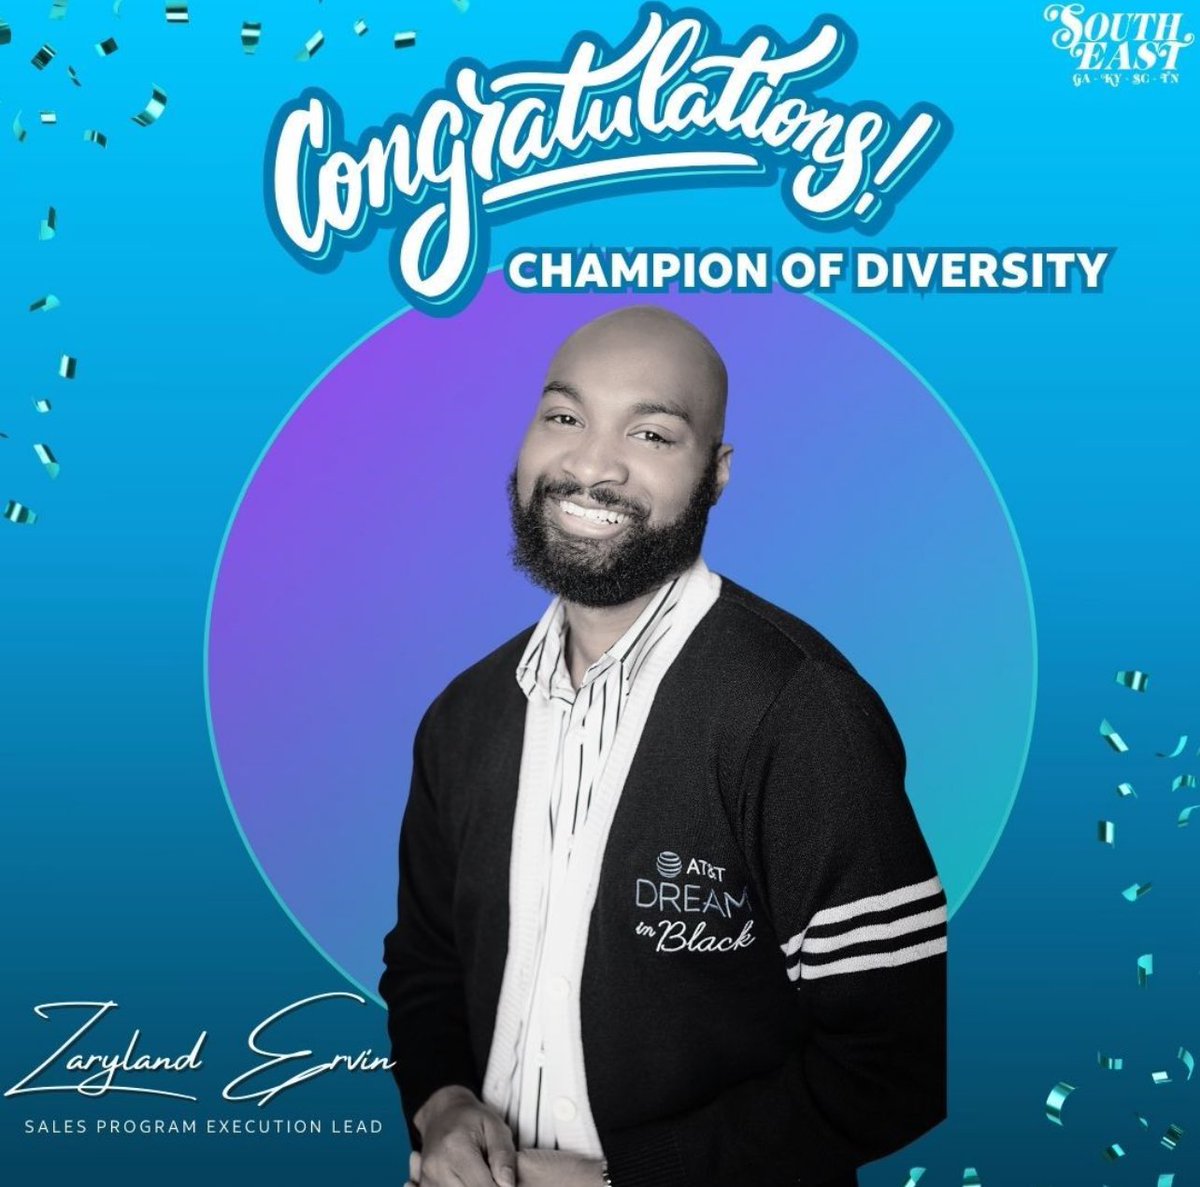 What a way to end 2023! 🎉 I’m extremely honored to have received the AT&T Diversity, Equity, and Inclusion “Champion of Diversity” award! There’s still more to be done, but I’m ready to get it handled! Thank you! Thank you! #LifeAtATT #DreamInBlack